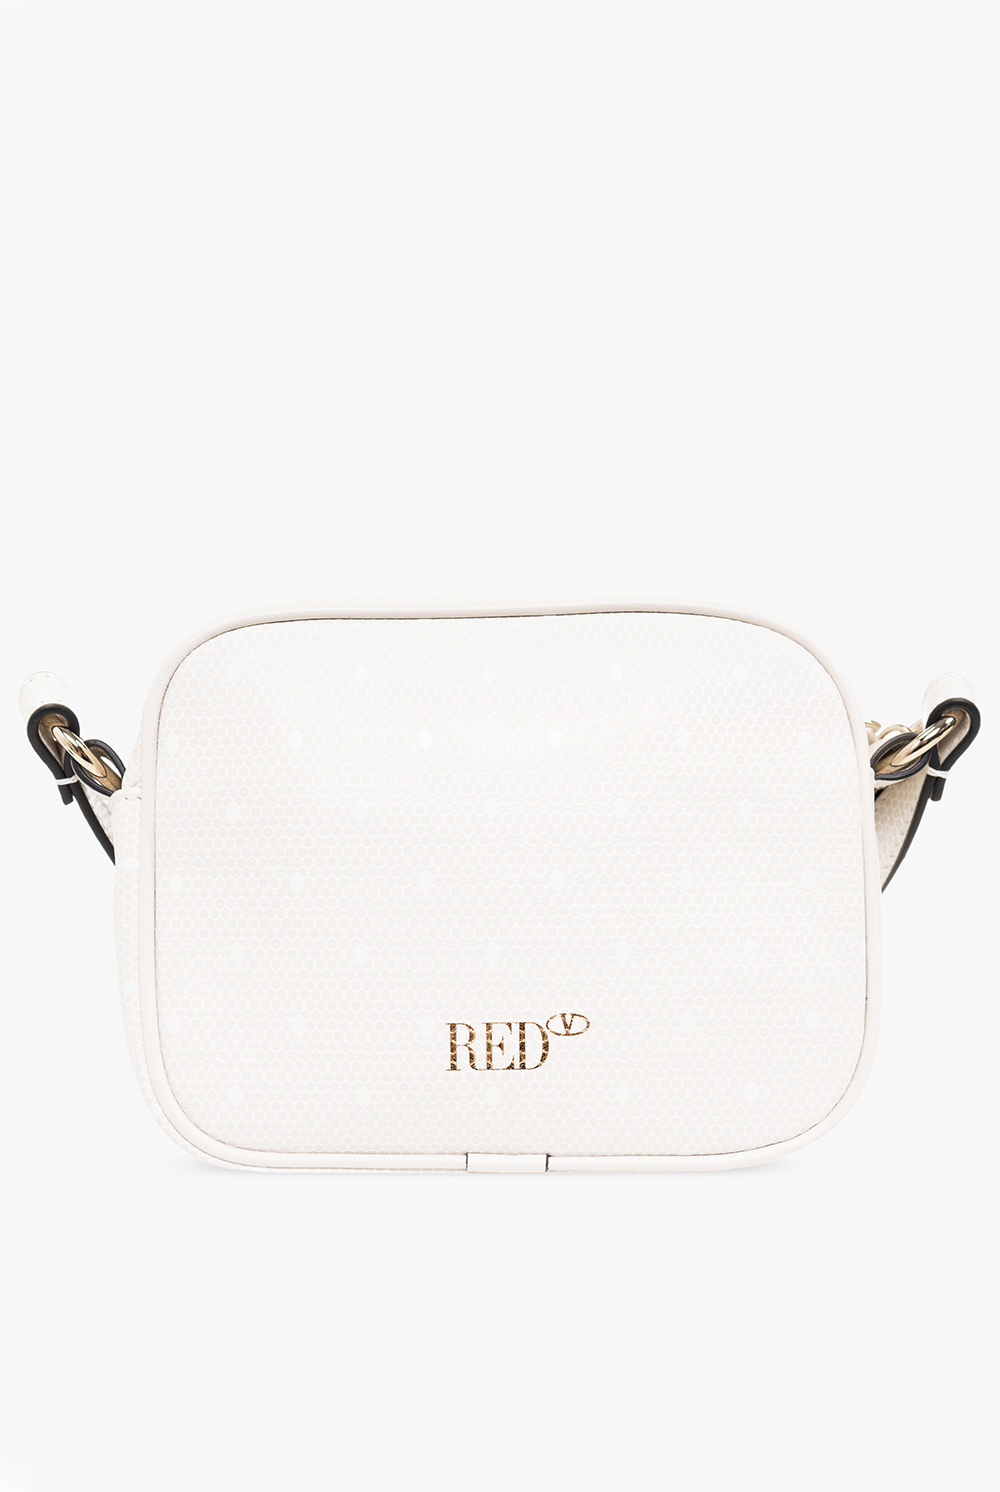 Red opens valentino Shoulder bag with logo